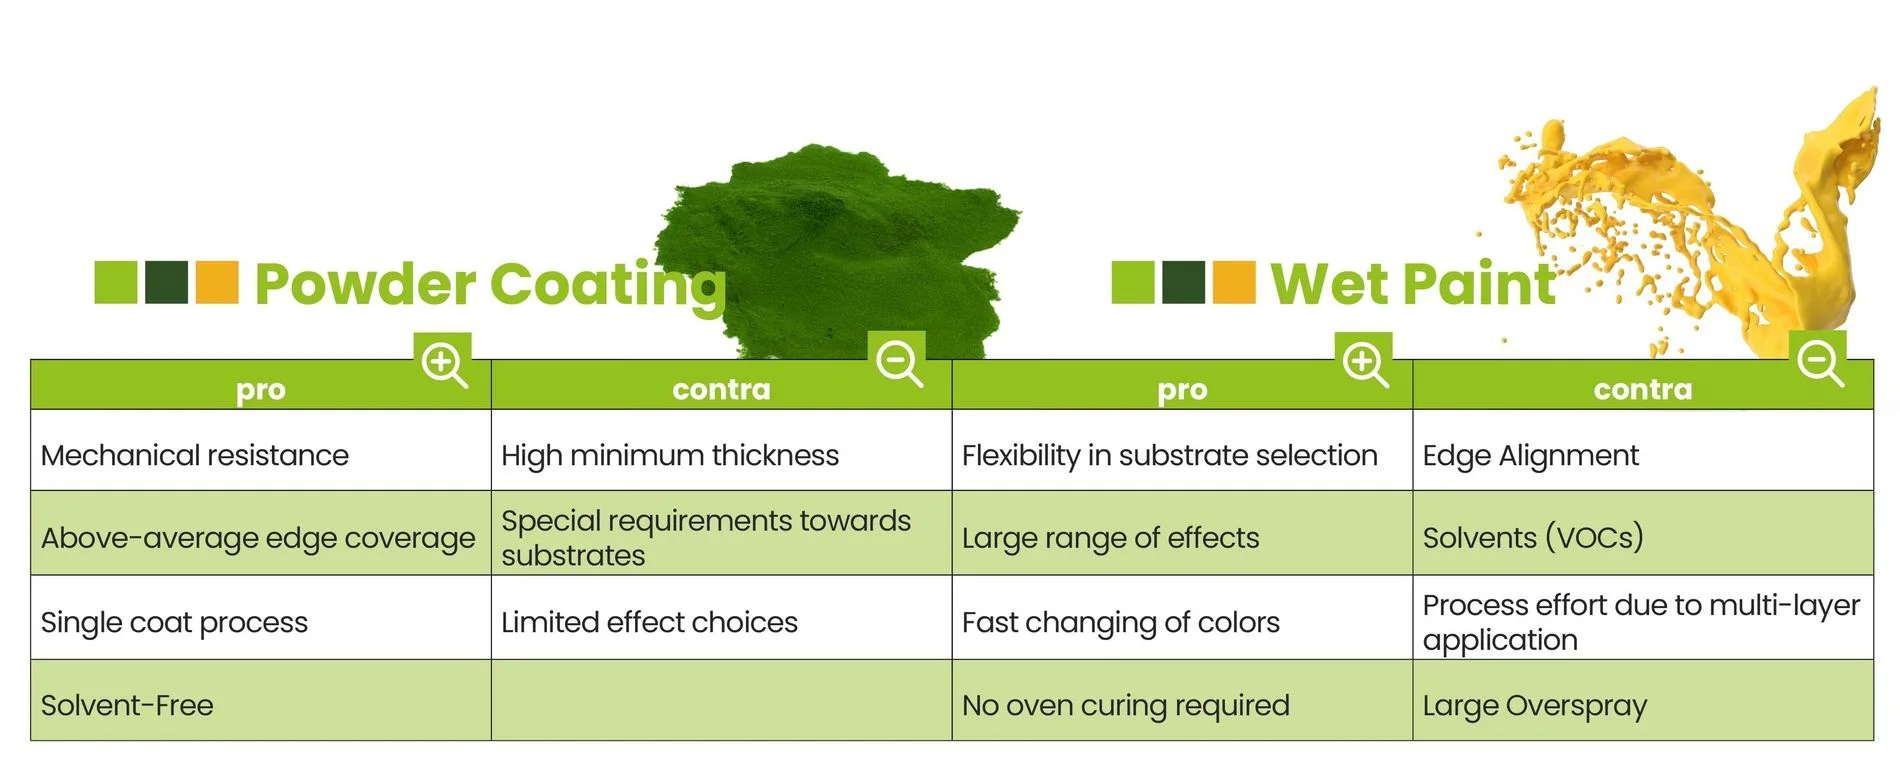 Advantages Wet Paint: Flexibility in substrate selection, Large range of effects, Fast changing of colors, no oven curing required; Disadvantages Wet Paint: Edge Alignment, Solvents (VOCs), Process effort due to multi-layer application, Large overspray; Advantages Powder Coating: Mechanical resistance, Above-average edge coverage, single coat process, Solvent-Free; Disadvantages Powder Coating: High minimum film thickness, Special requirements towards substrates, Limited effect choices